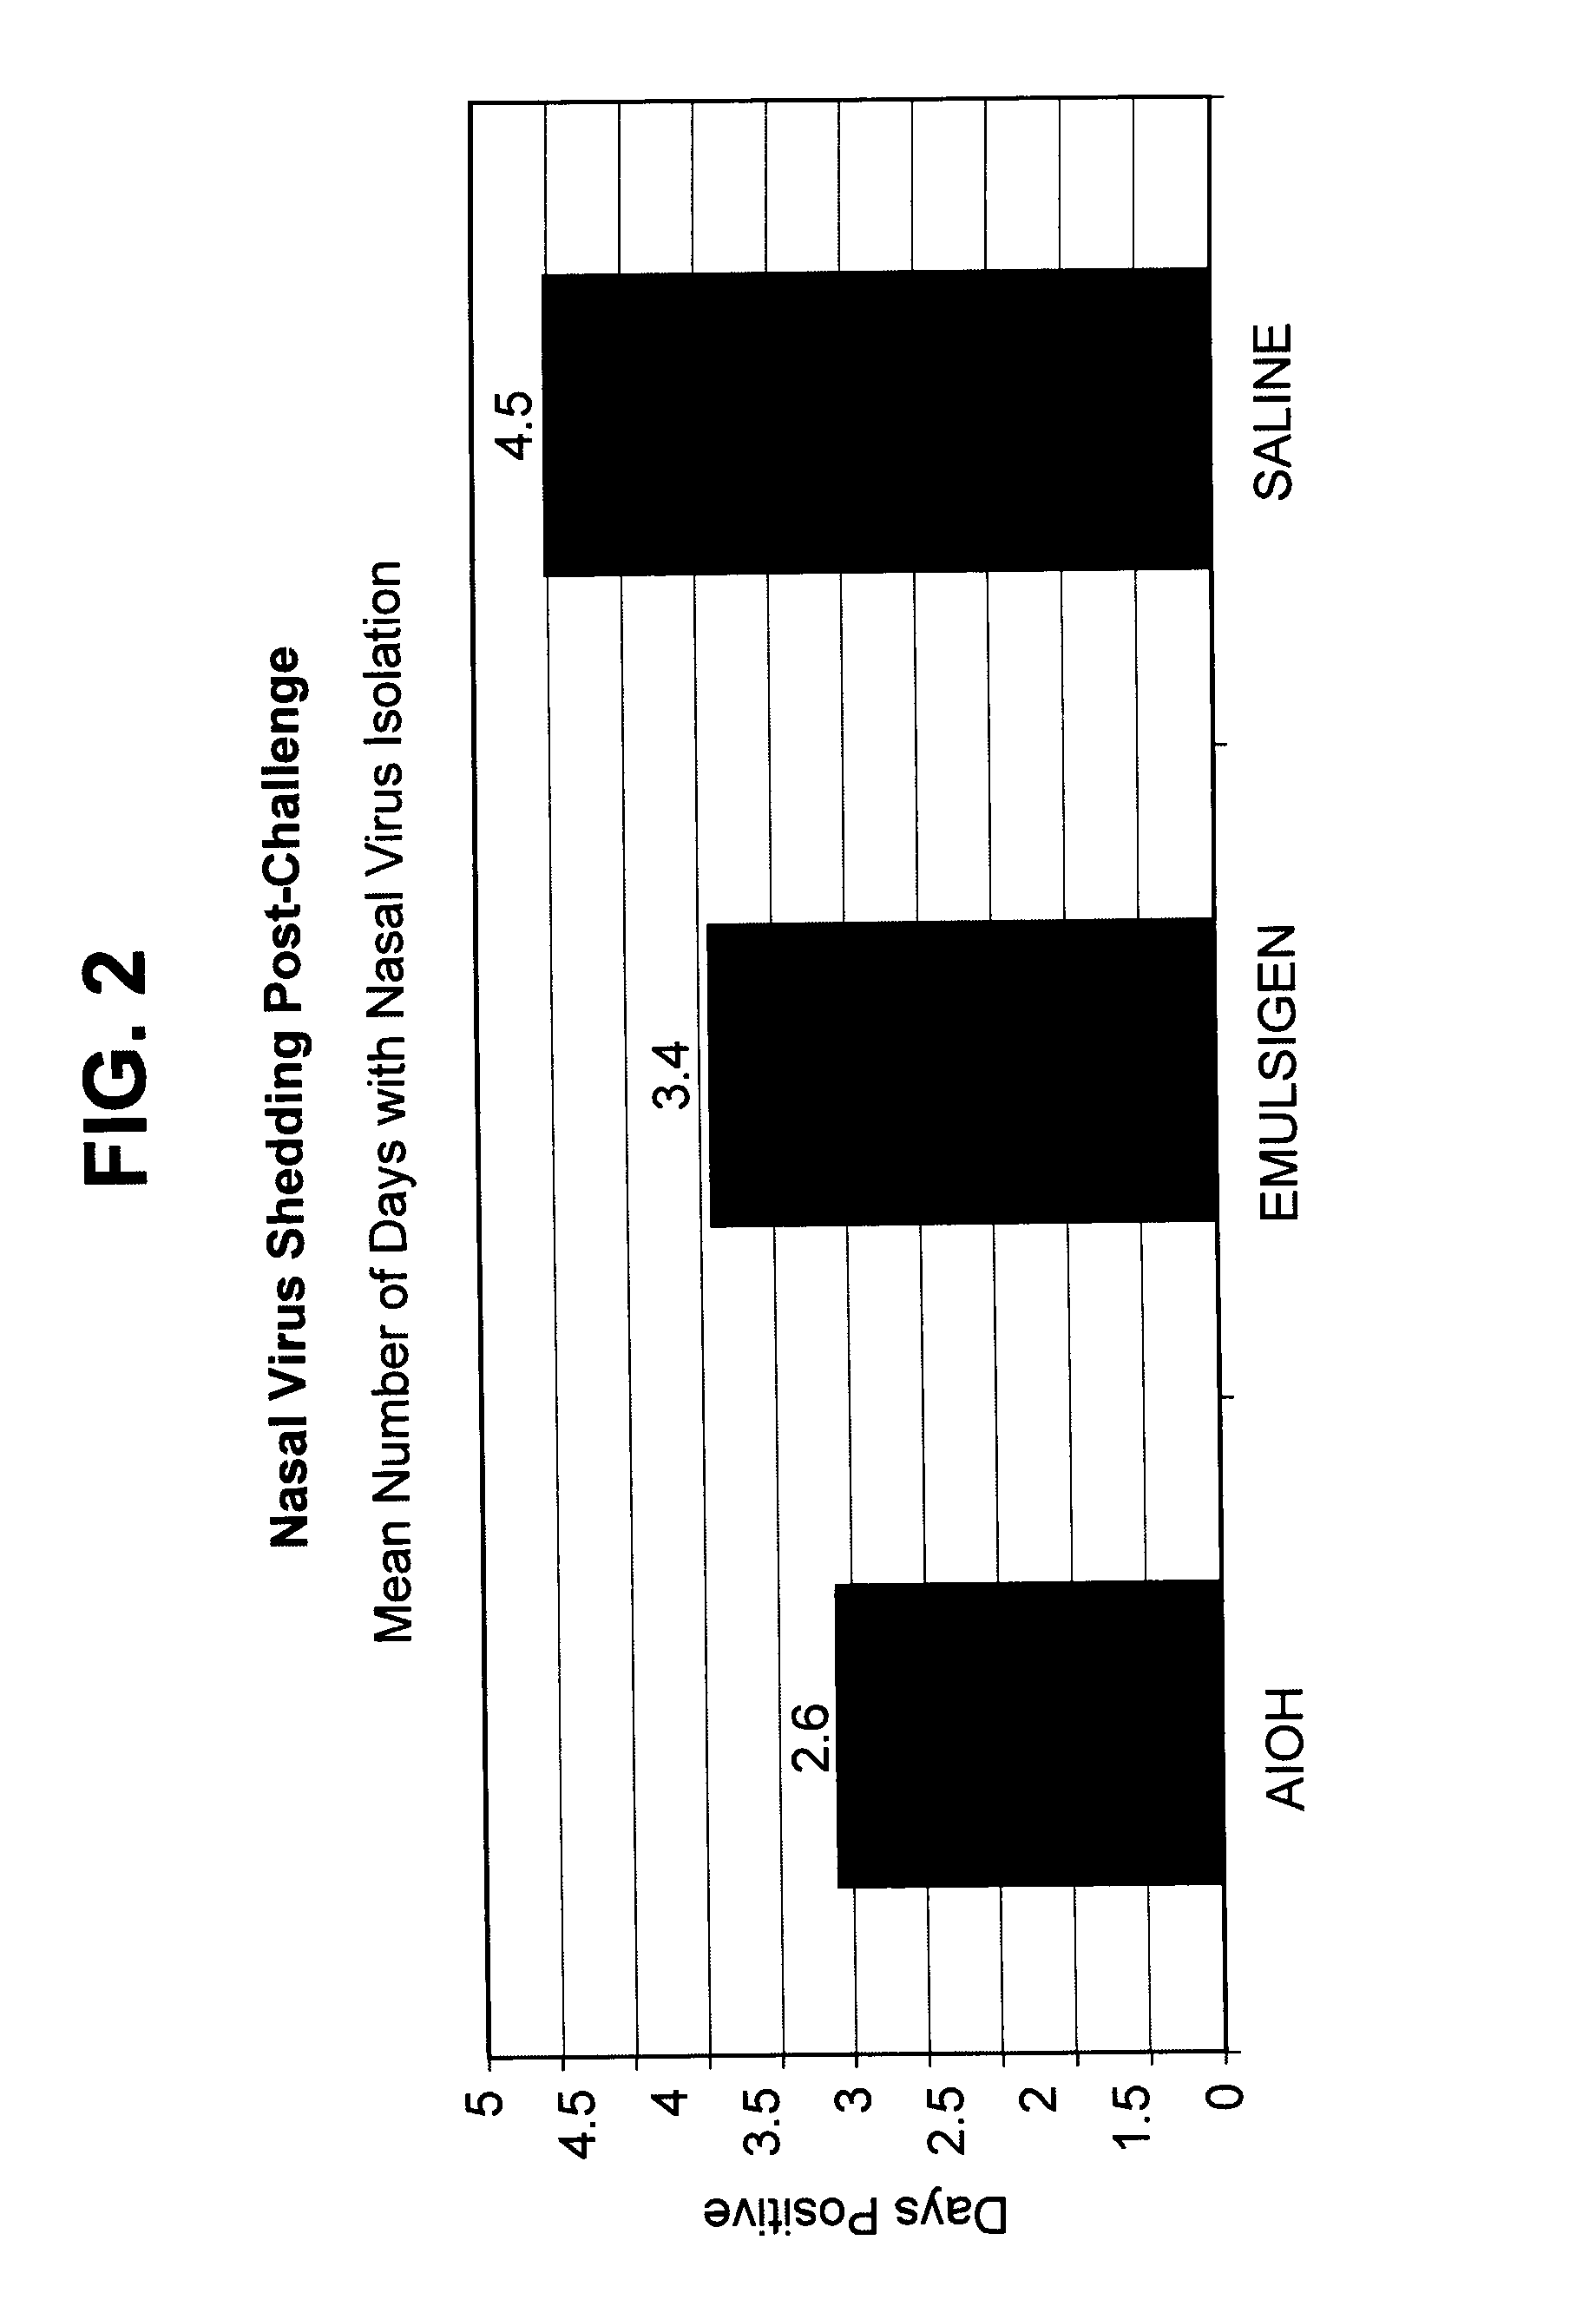 Compositions for Canine Respiratory Disease Complex